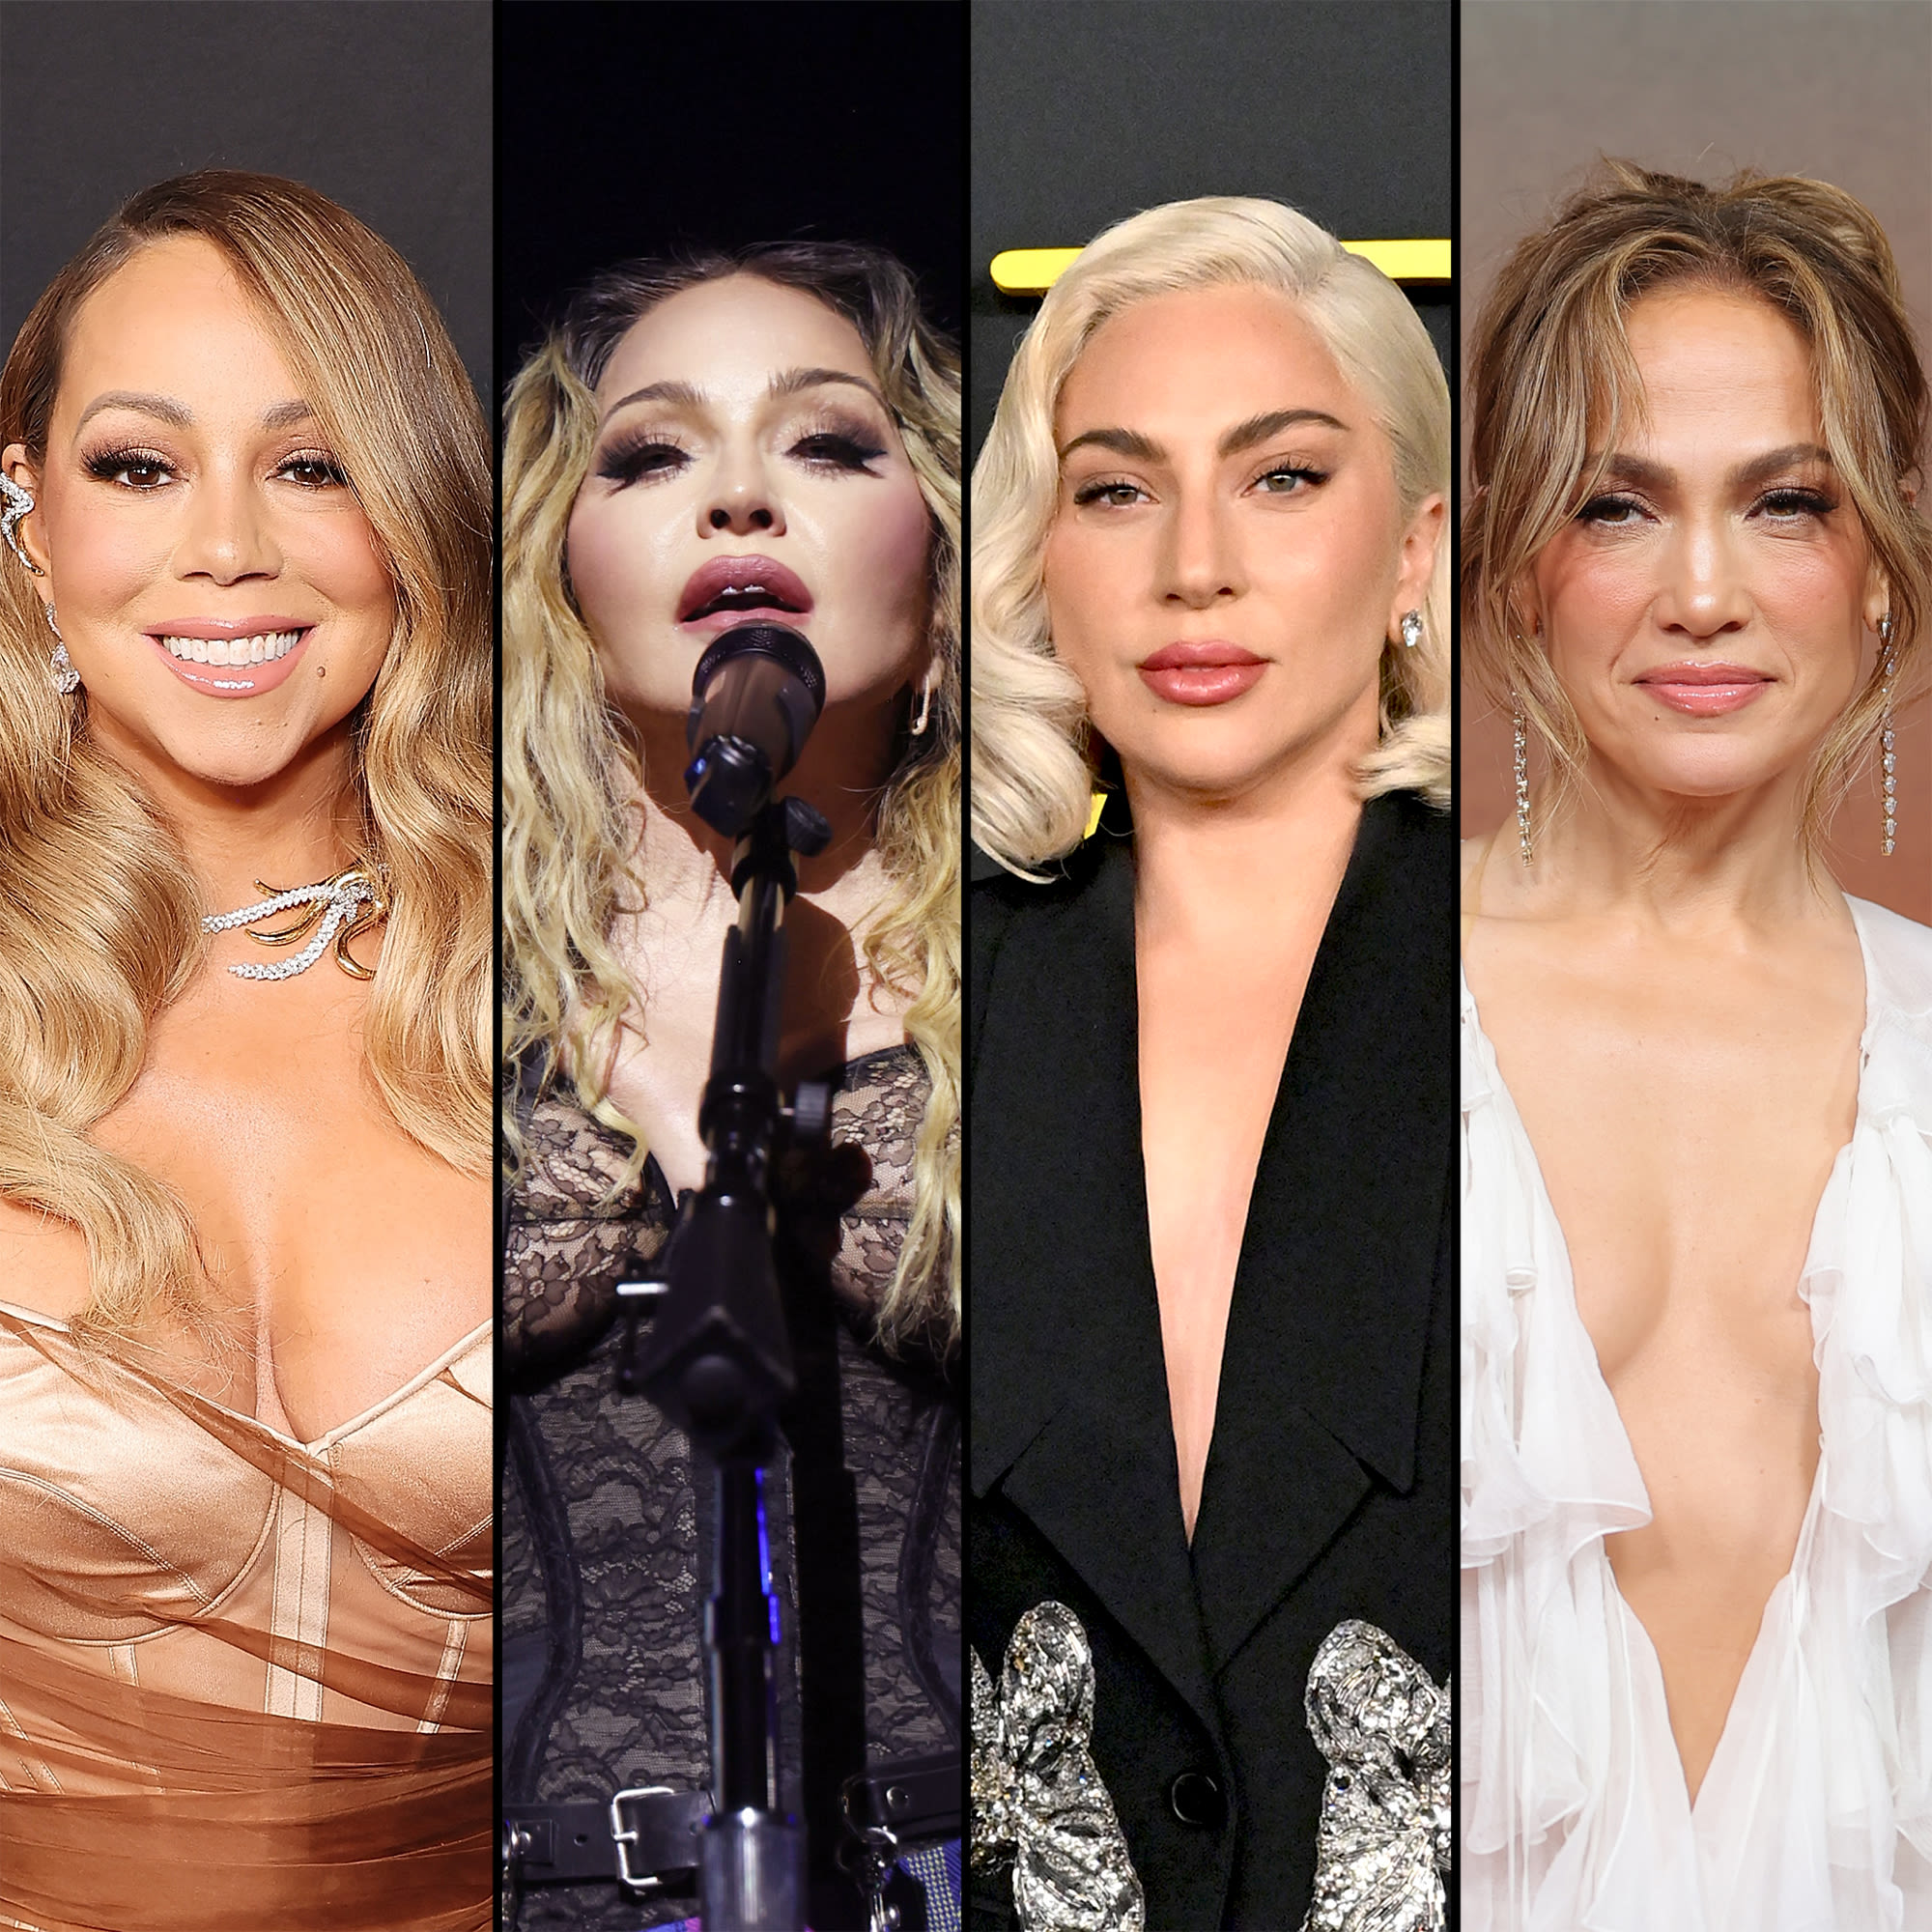 Mariah Carey, Madonna and Lady Gaga Are Loving Jennifer Lopez’s Career and Marriage Pain